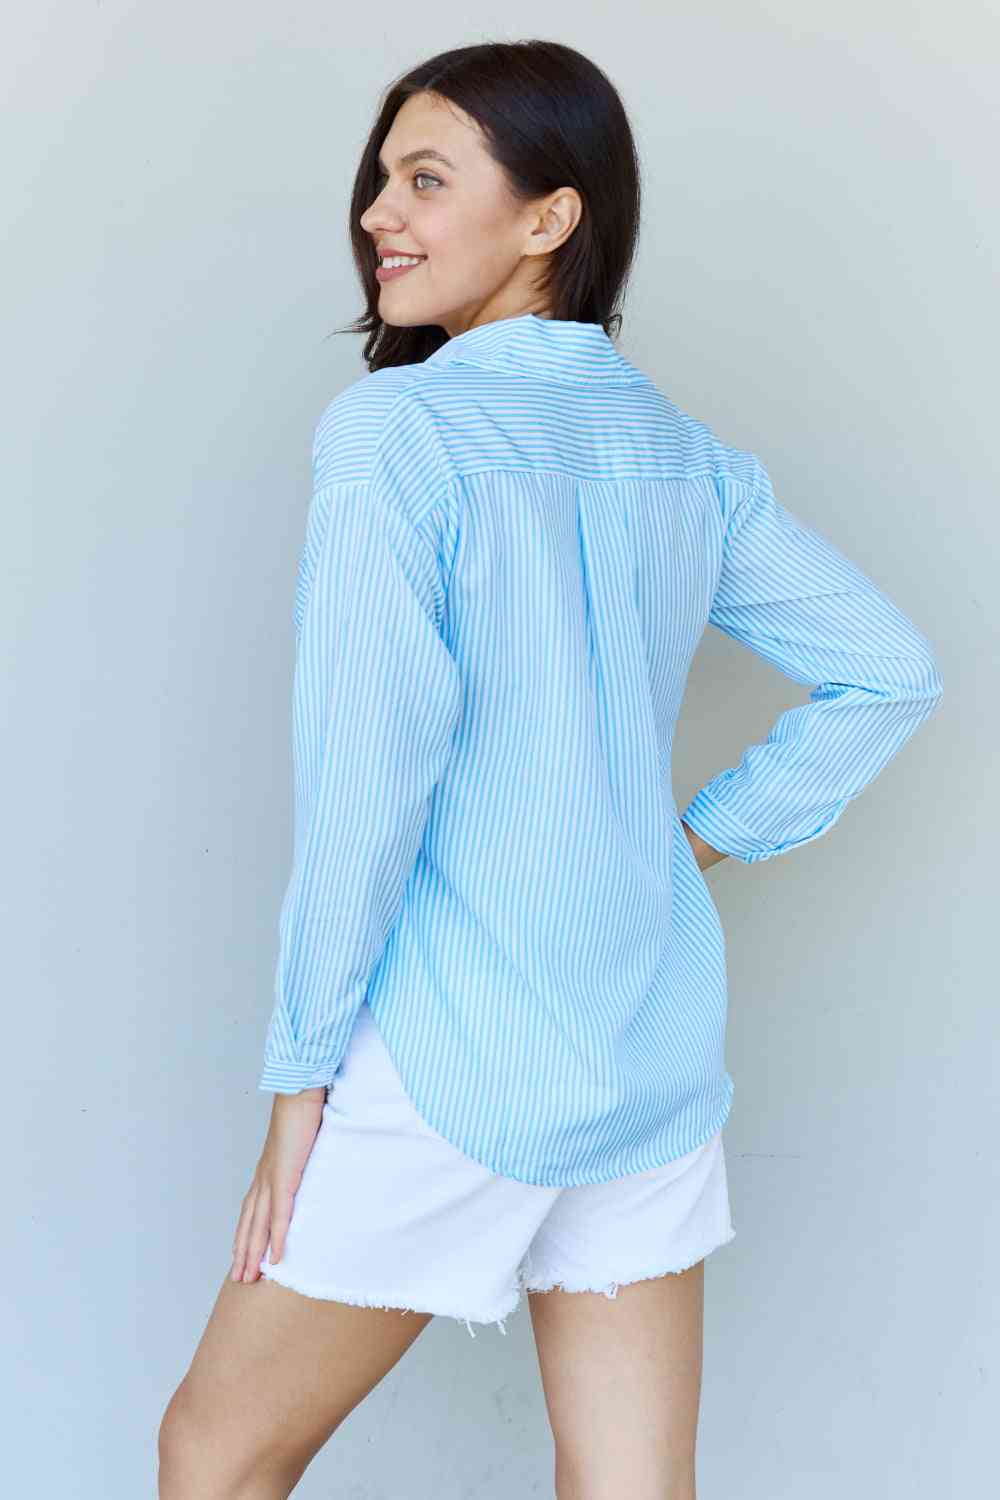 he Means Business Striped Button Down Shirt Top in Blue  Southern Soul Collectives